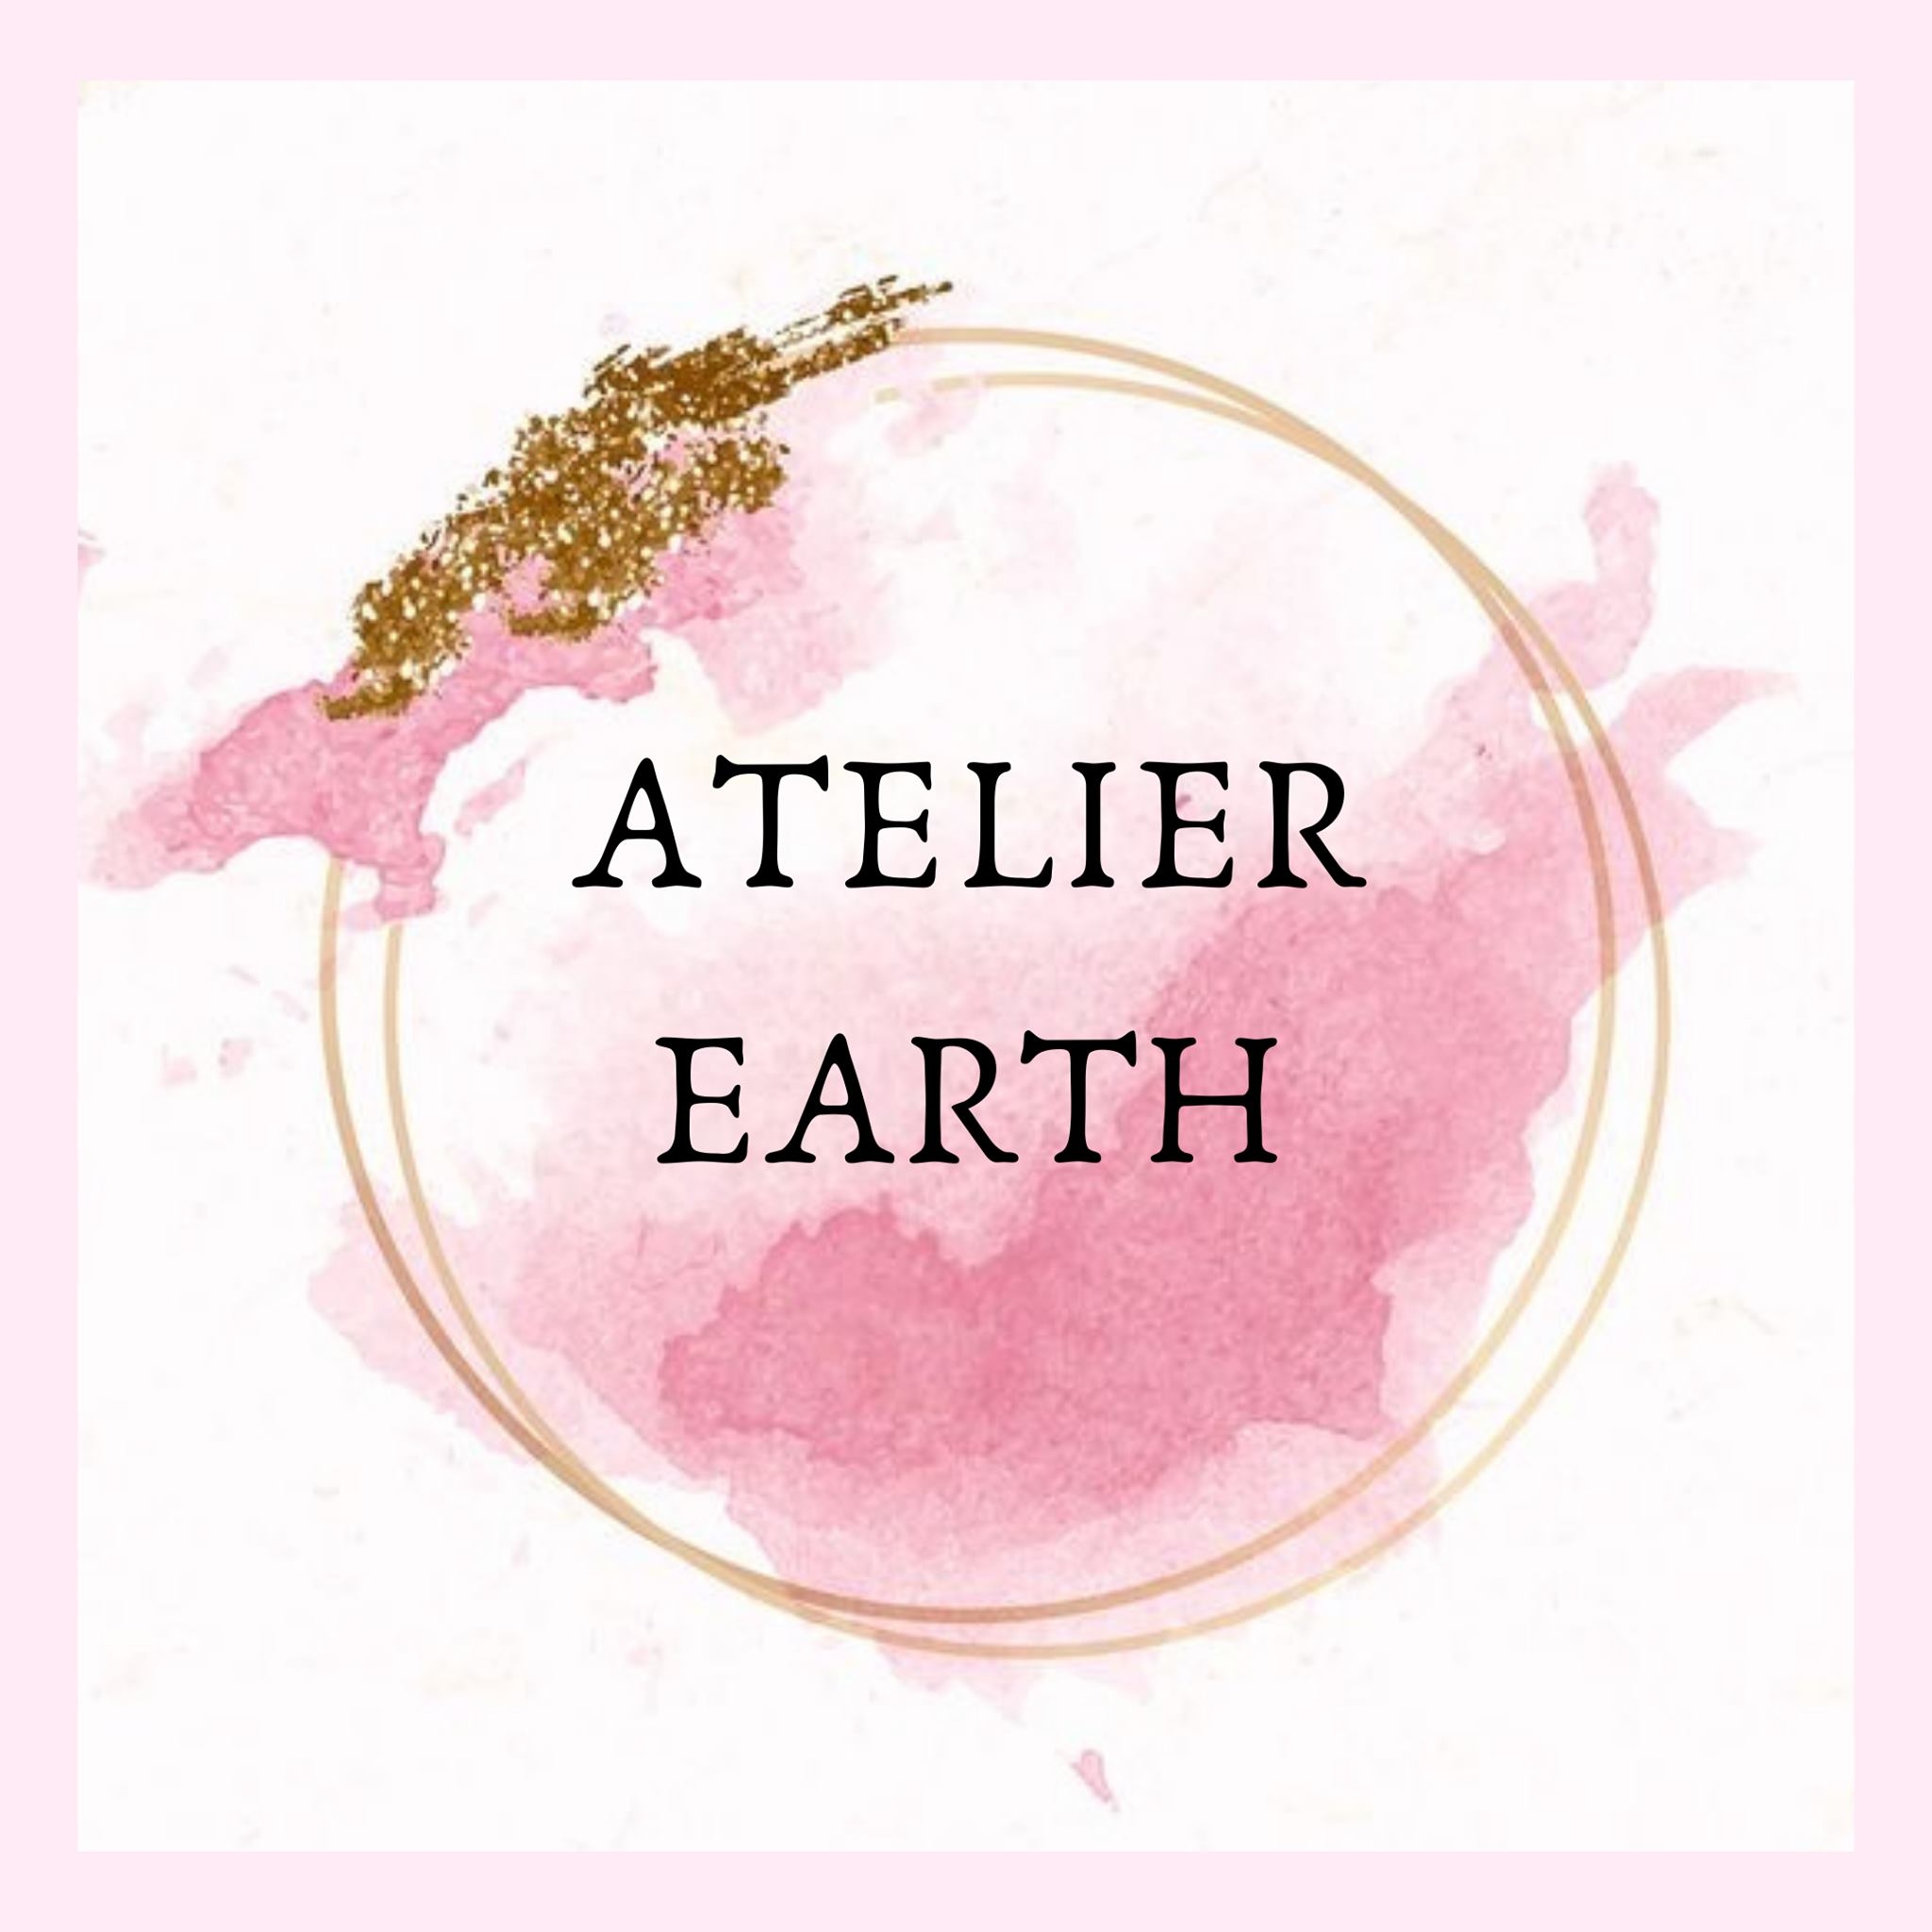 Atelier Earth|IT Services|Professional Services